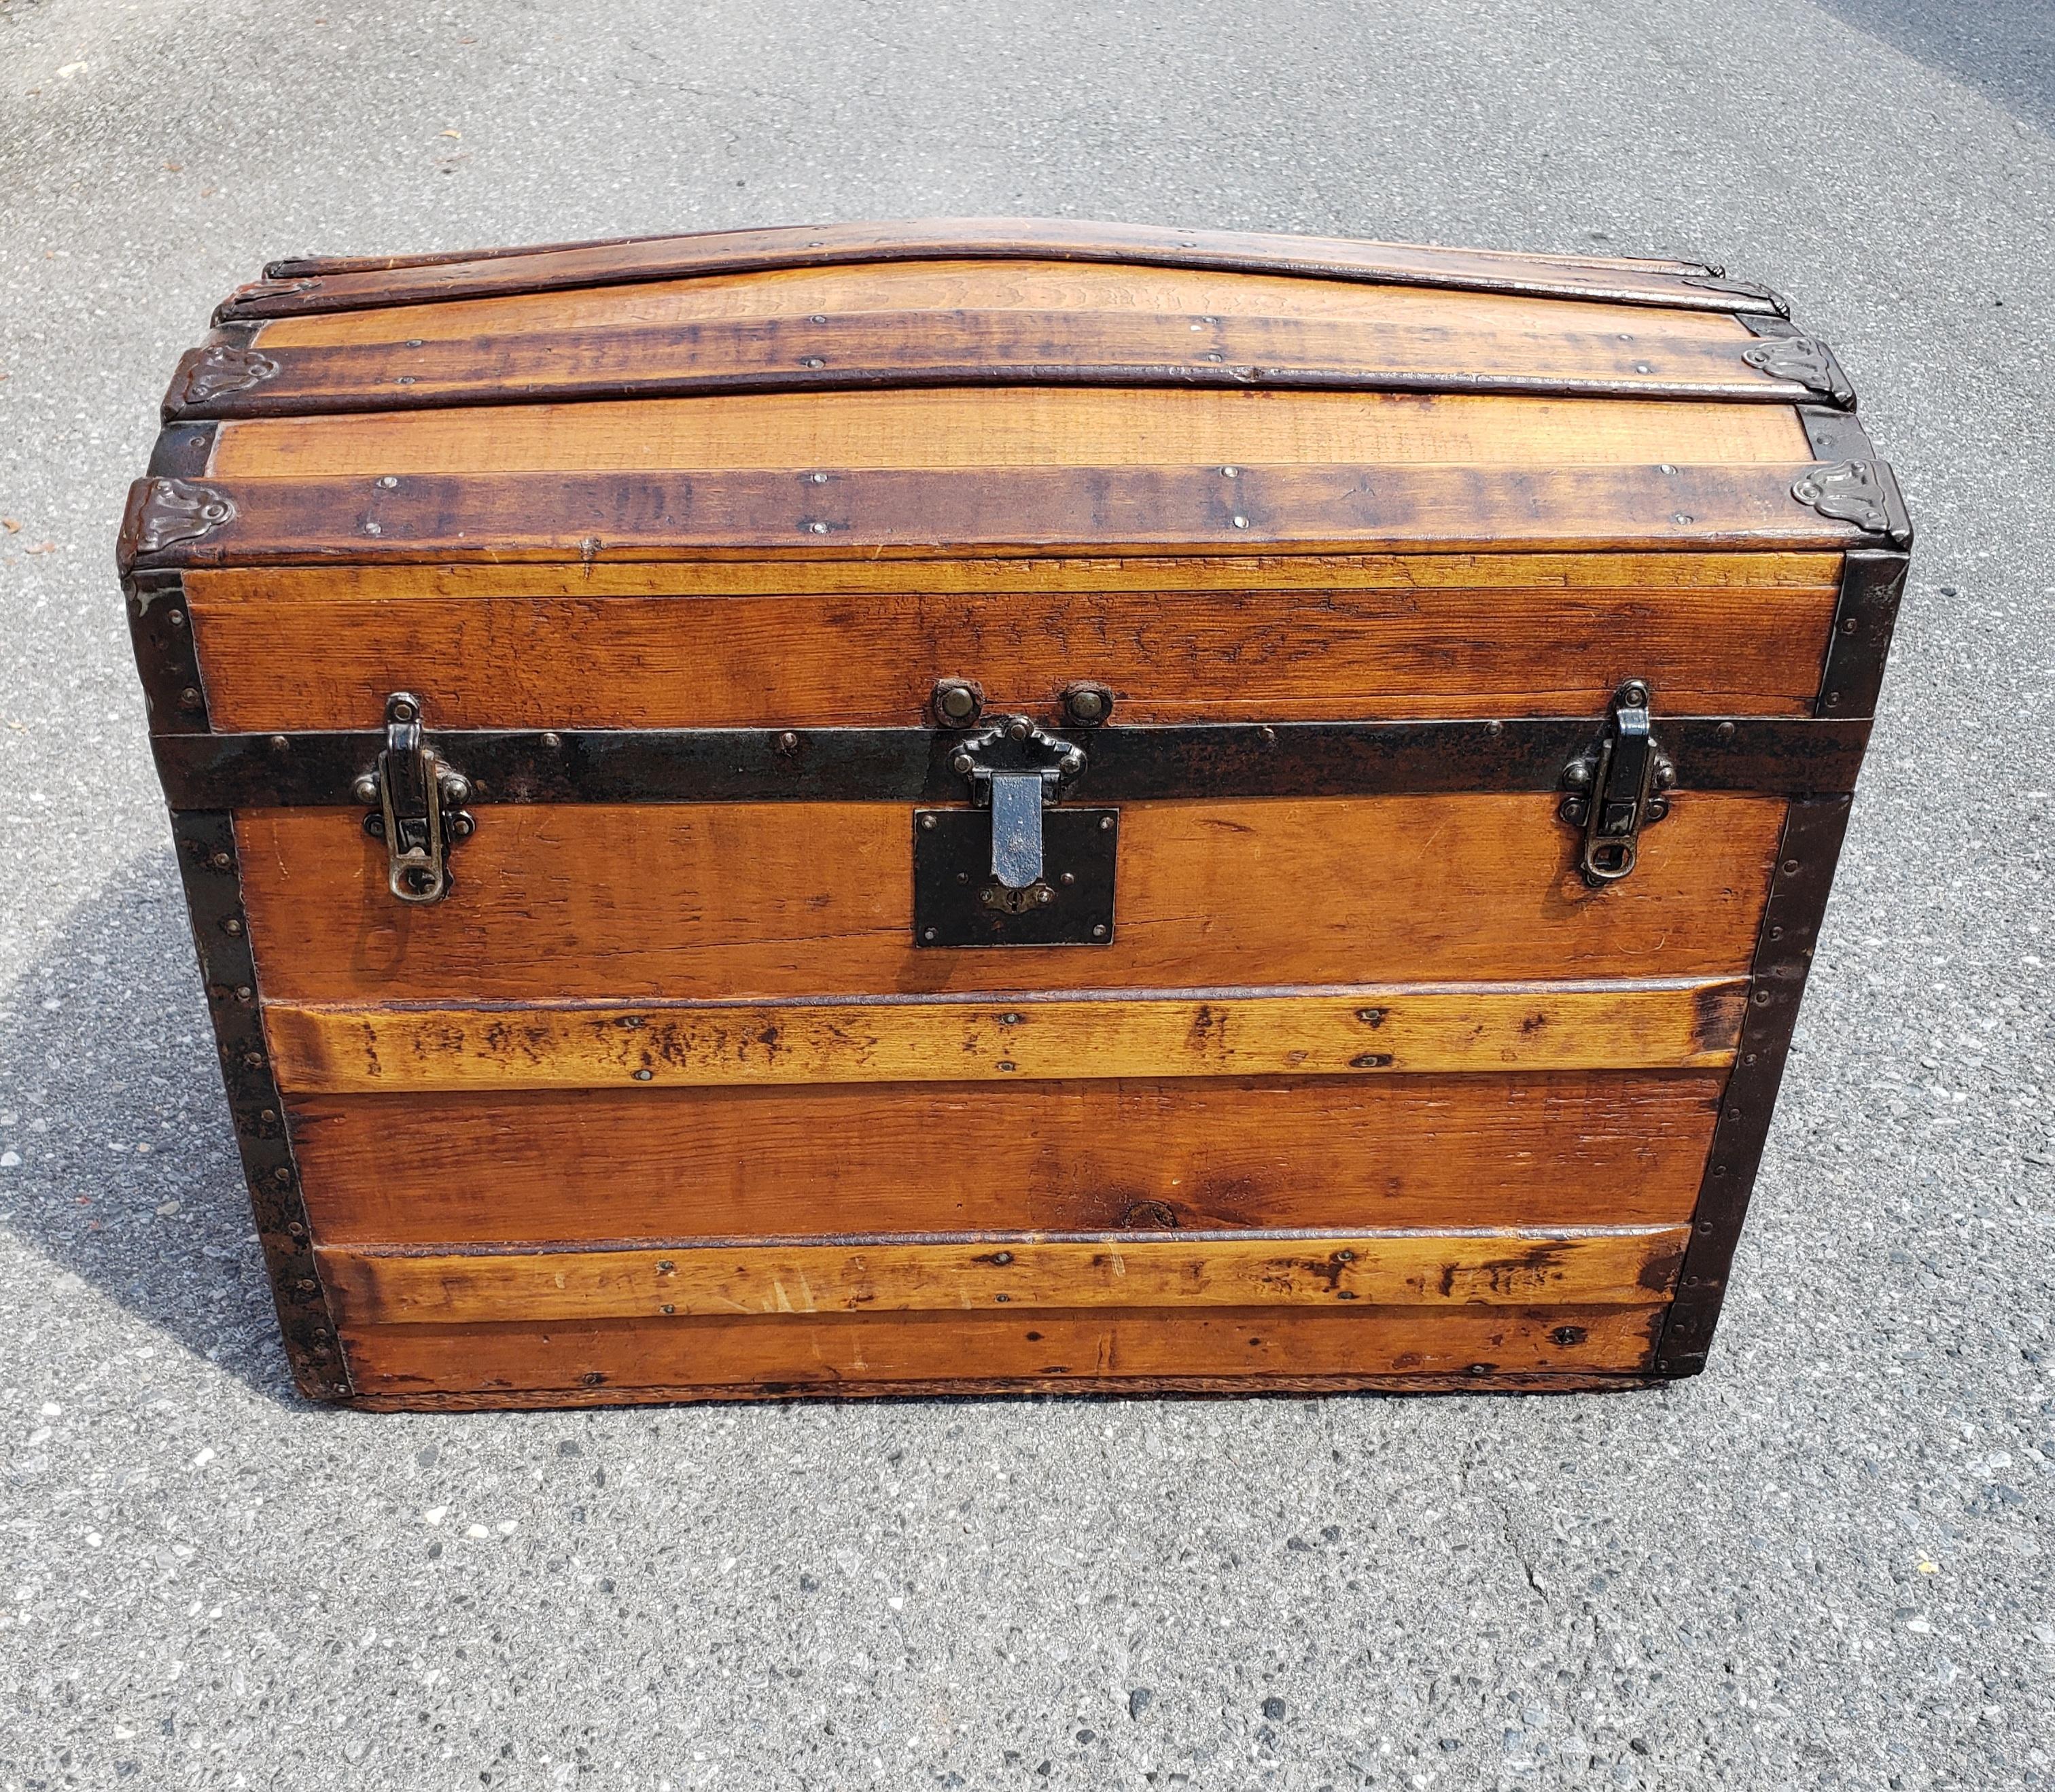 Early 20th Century American Rolling pine Blanket Trunk. Measures 29